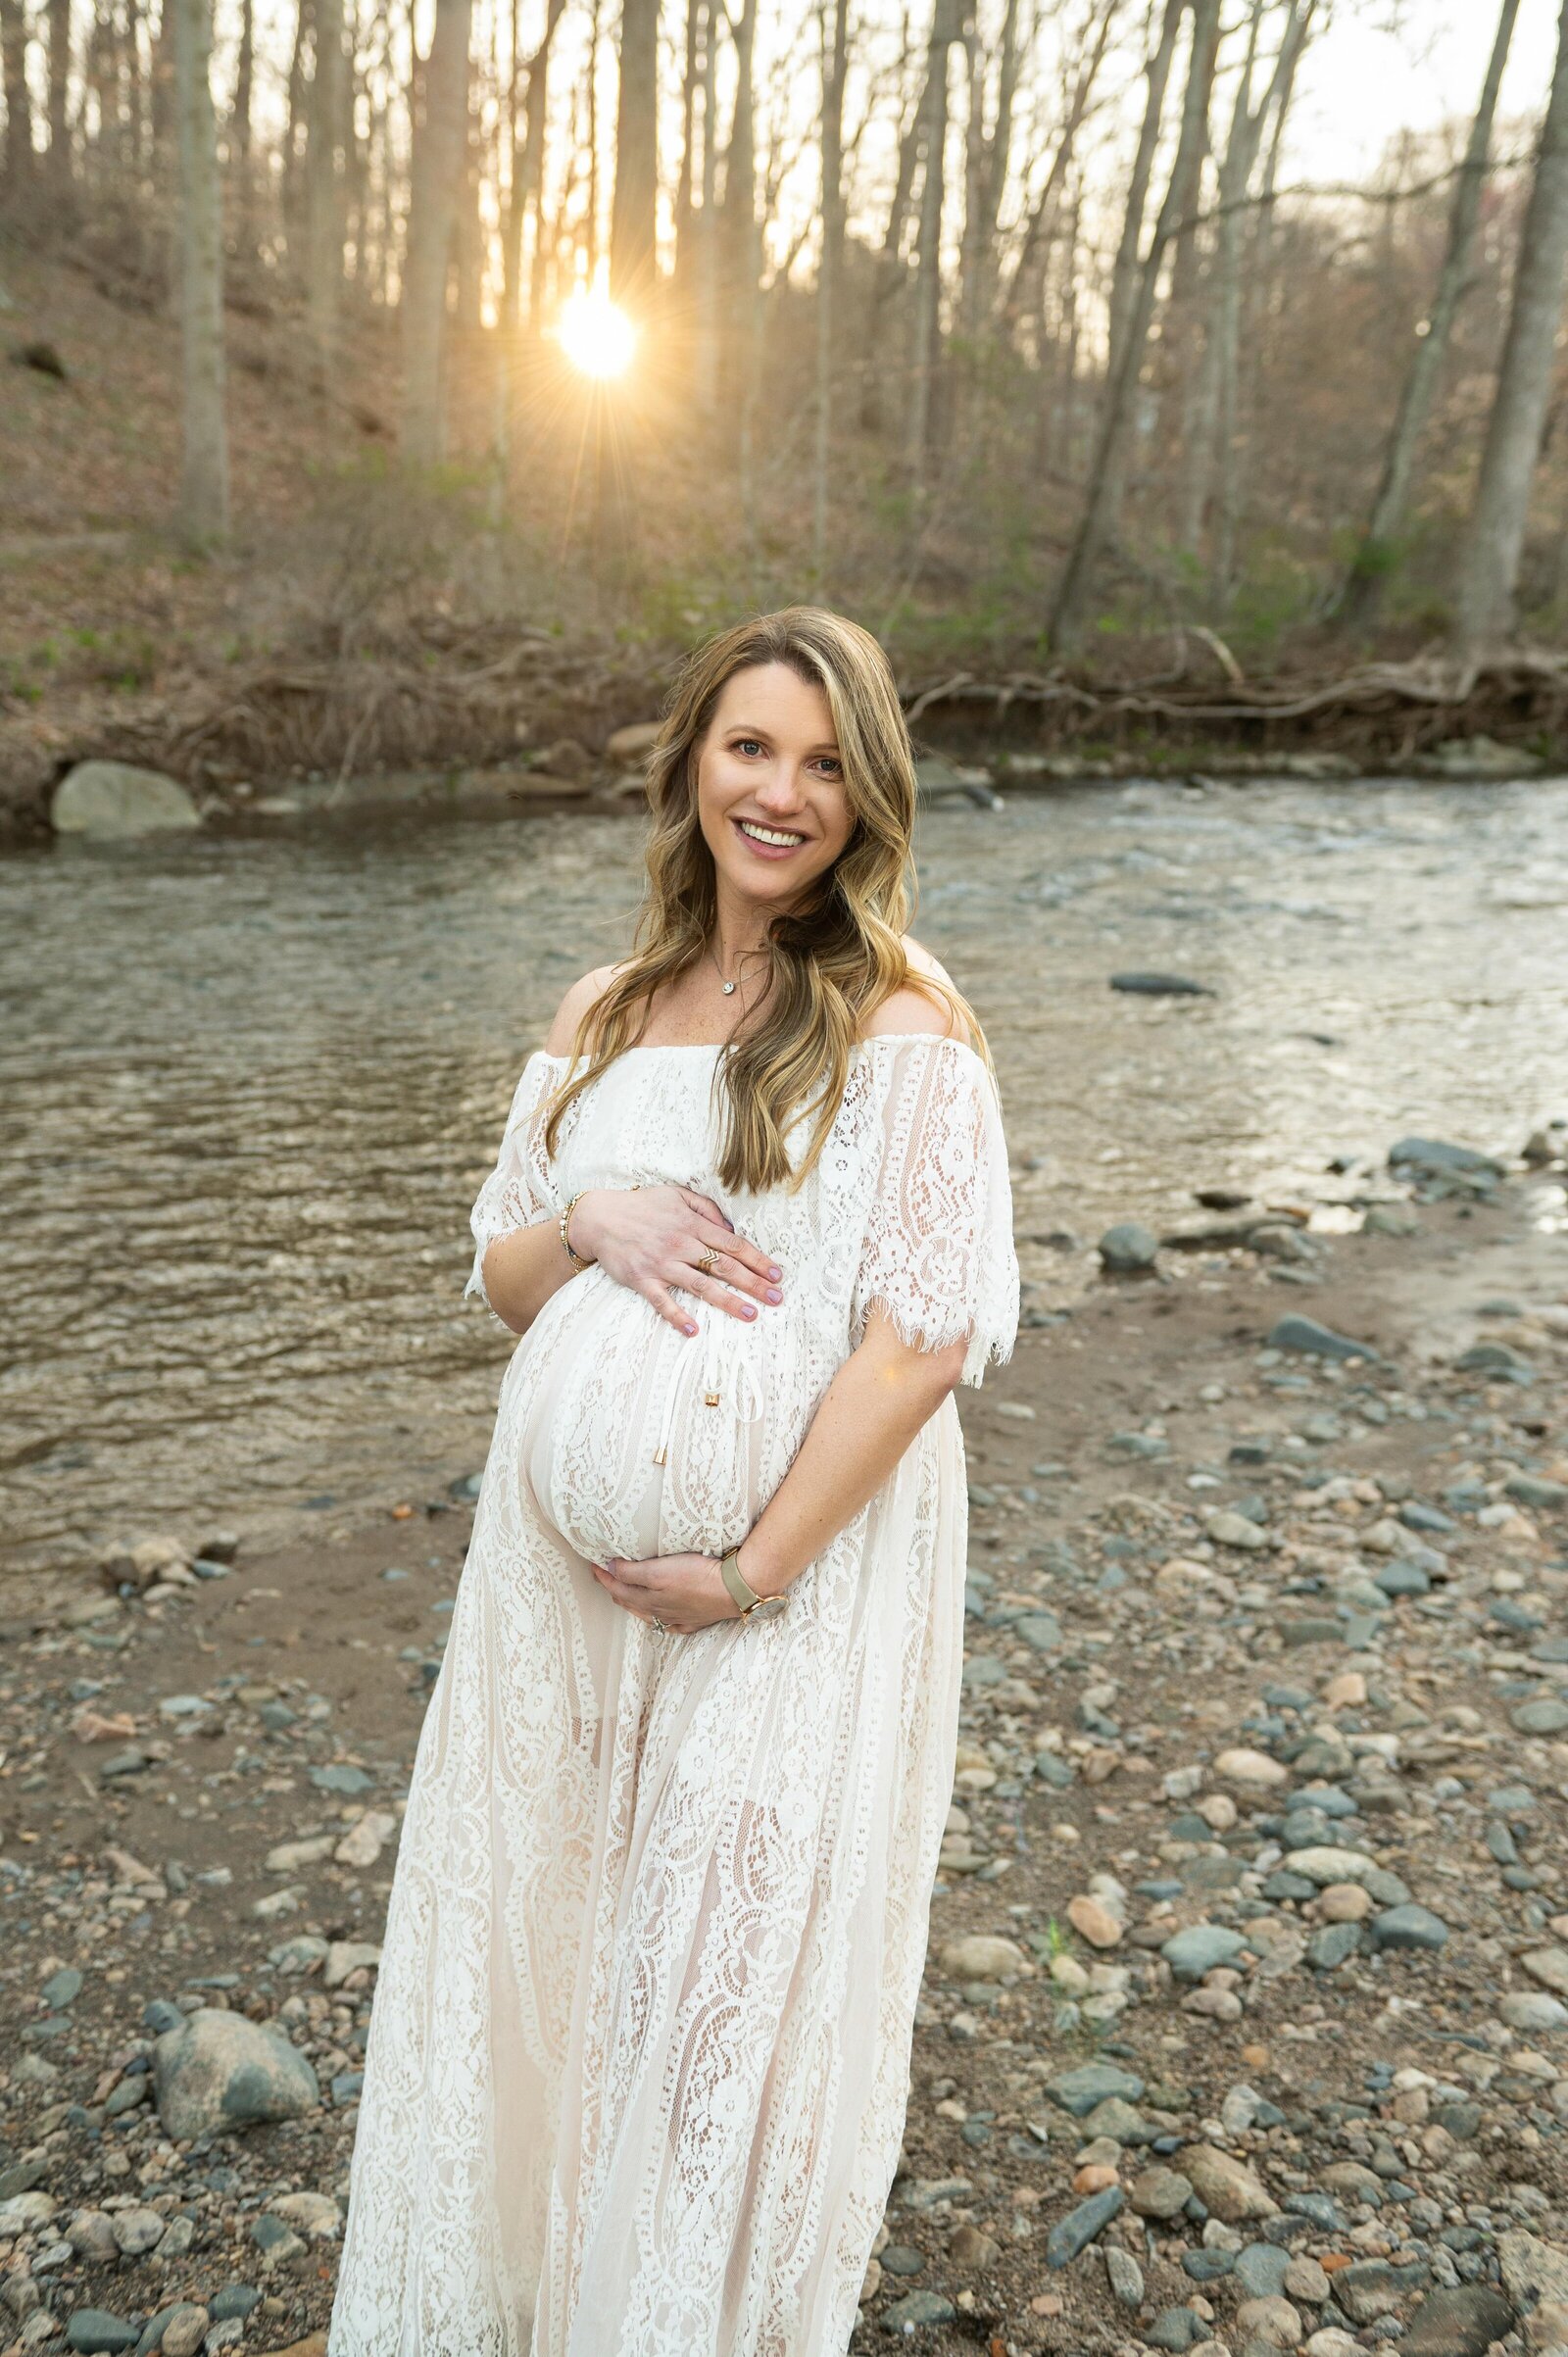 mom at sunset by the river in a white maternity dress